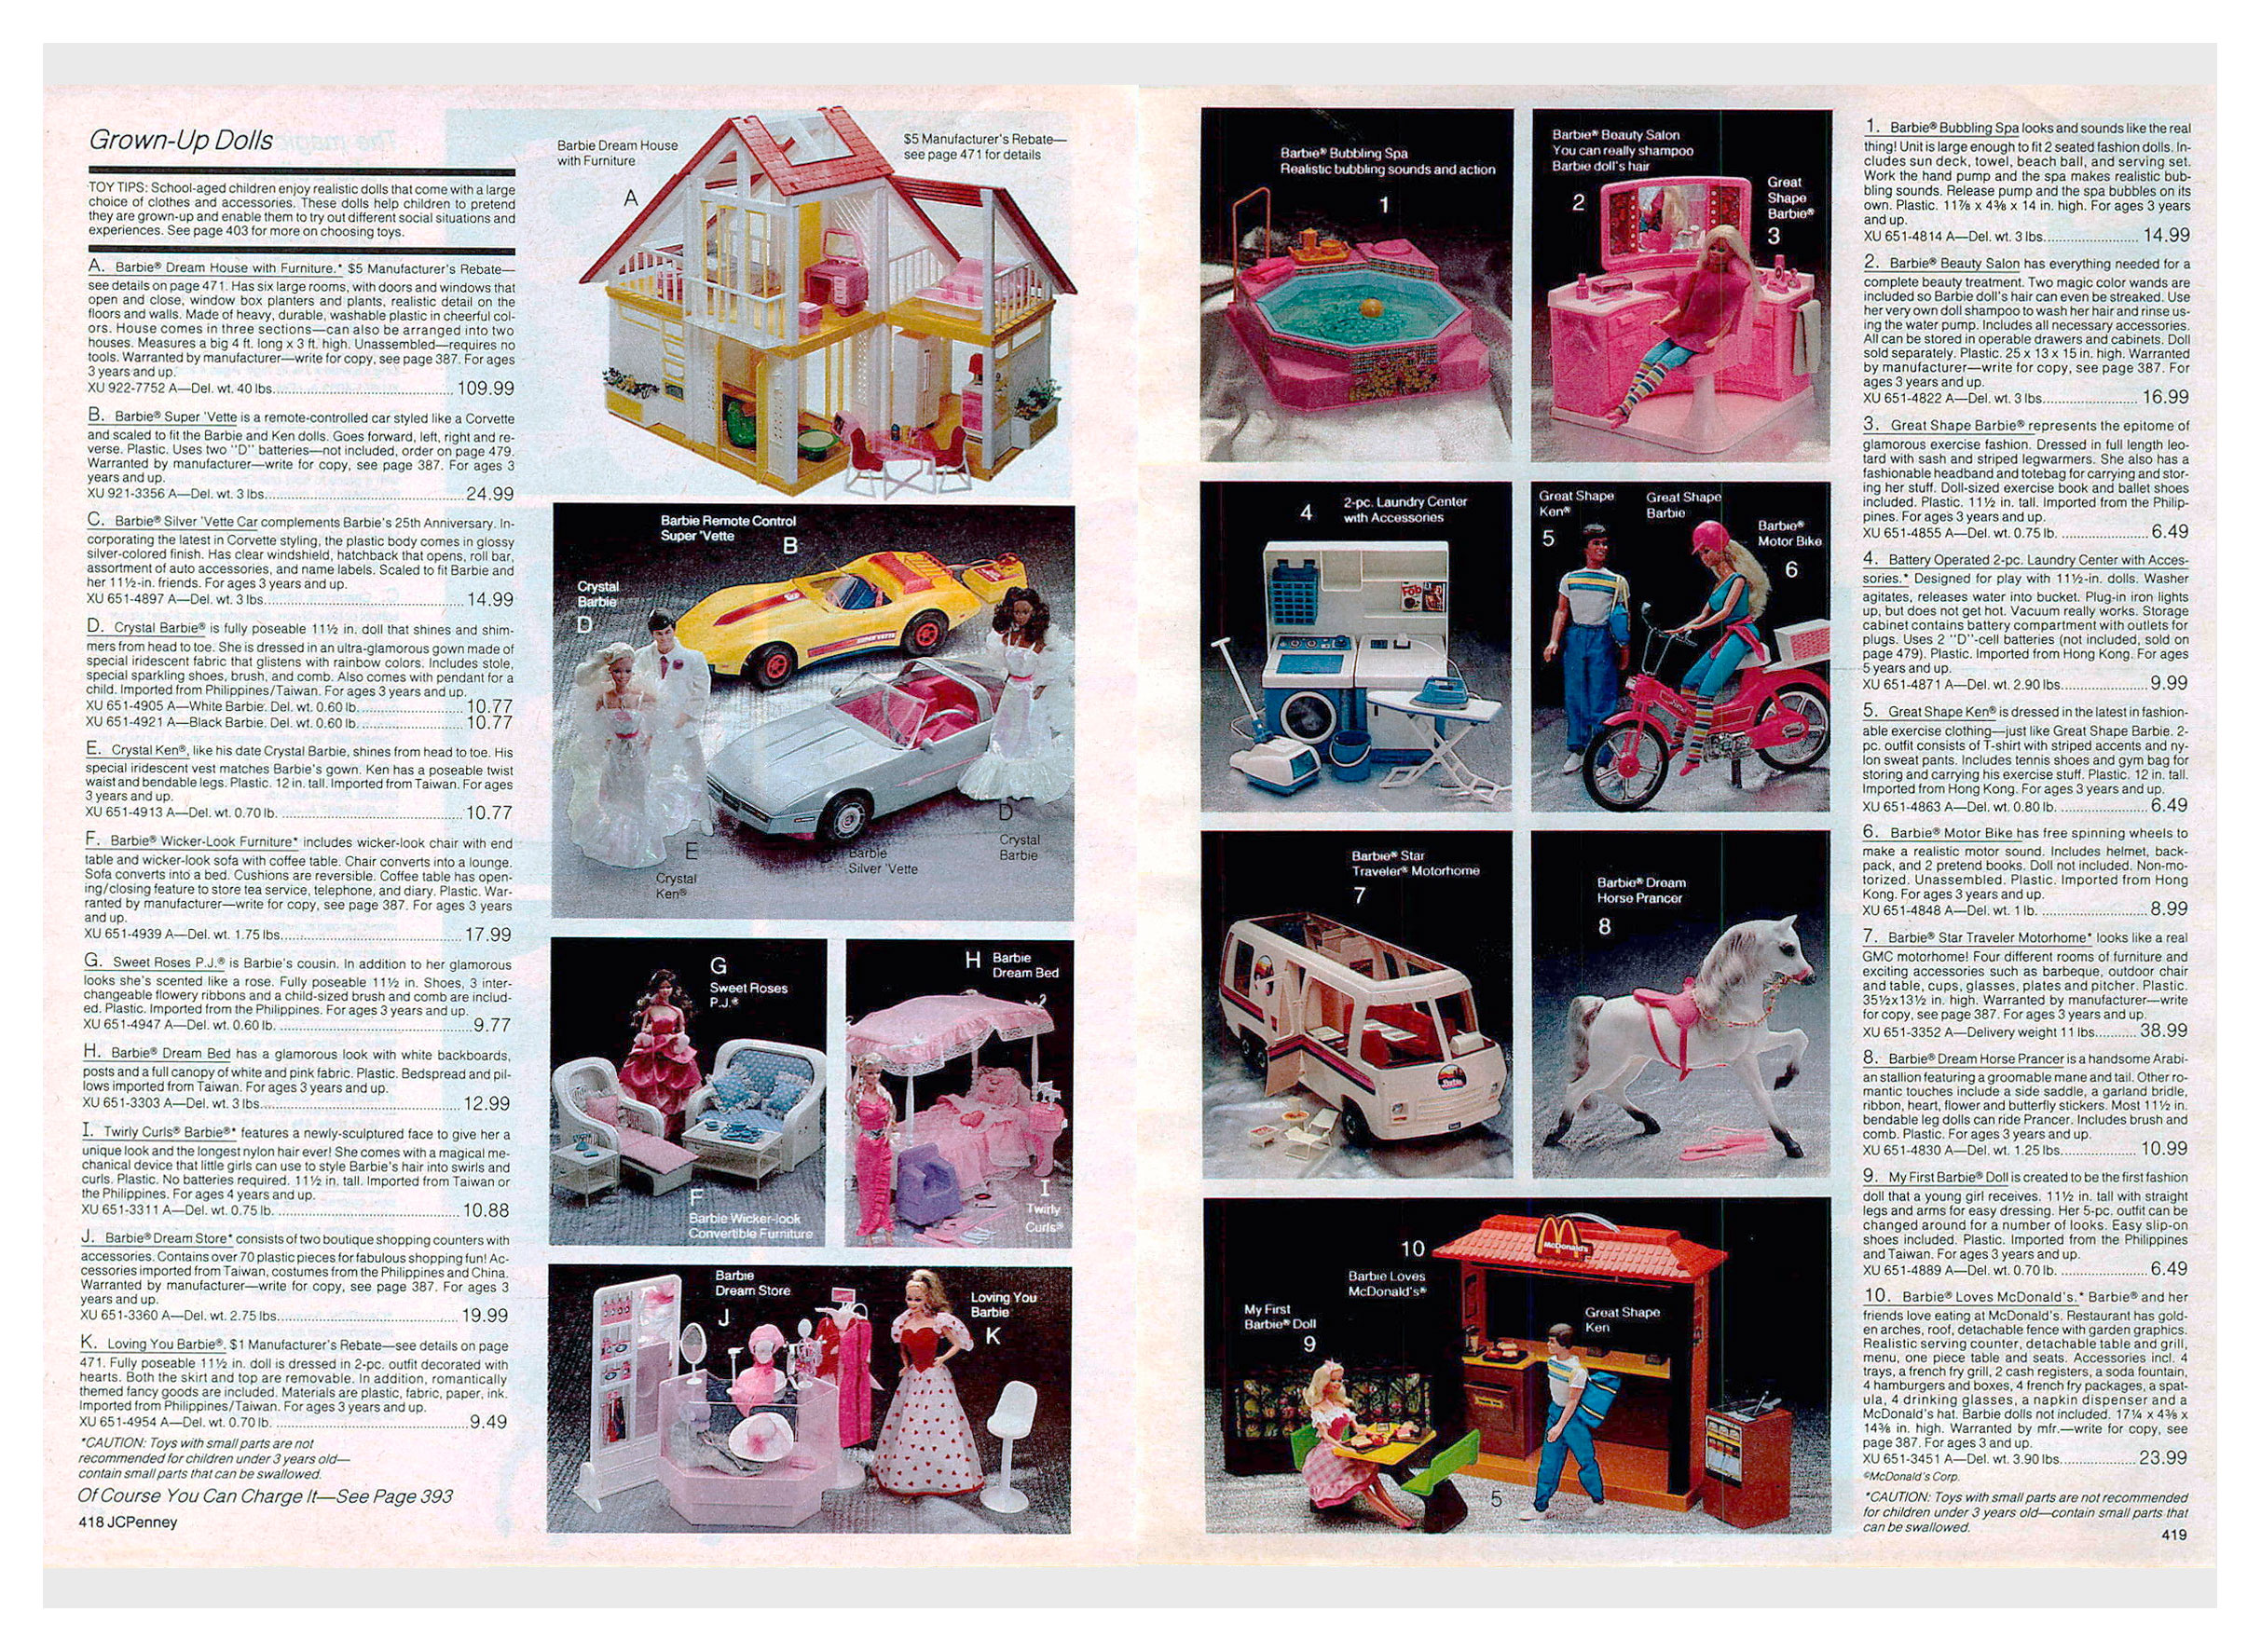 From 1984 JCPenney Christmas catalogue